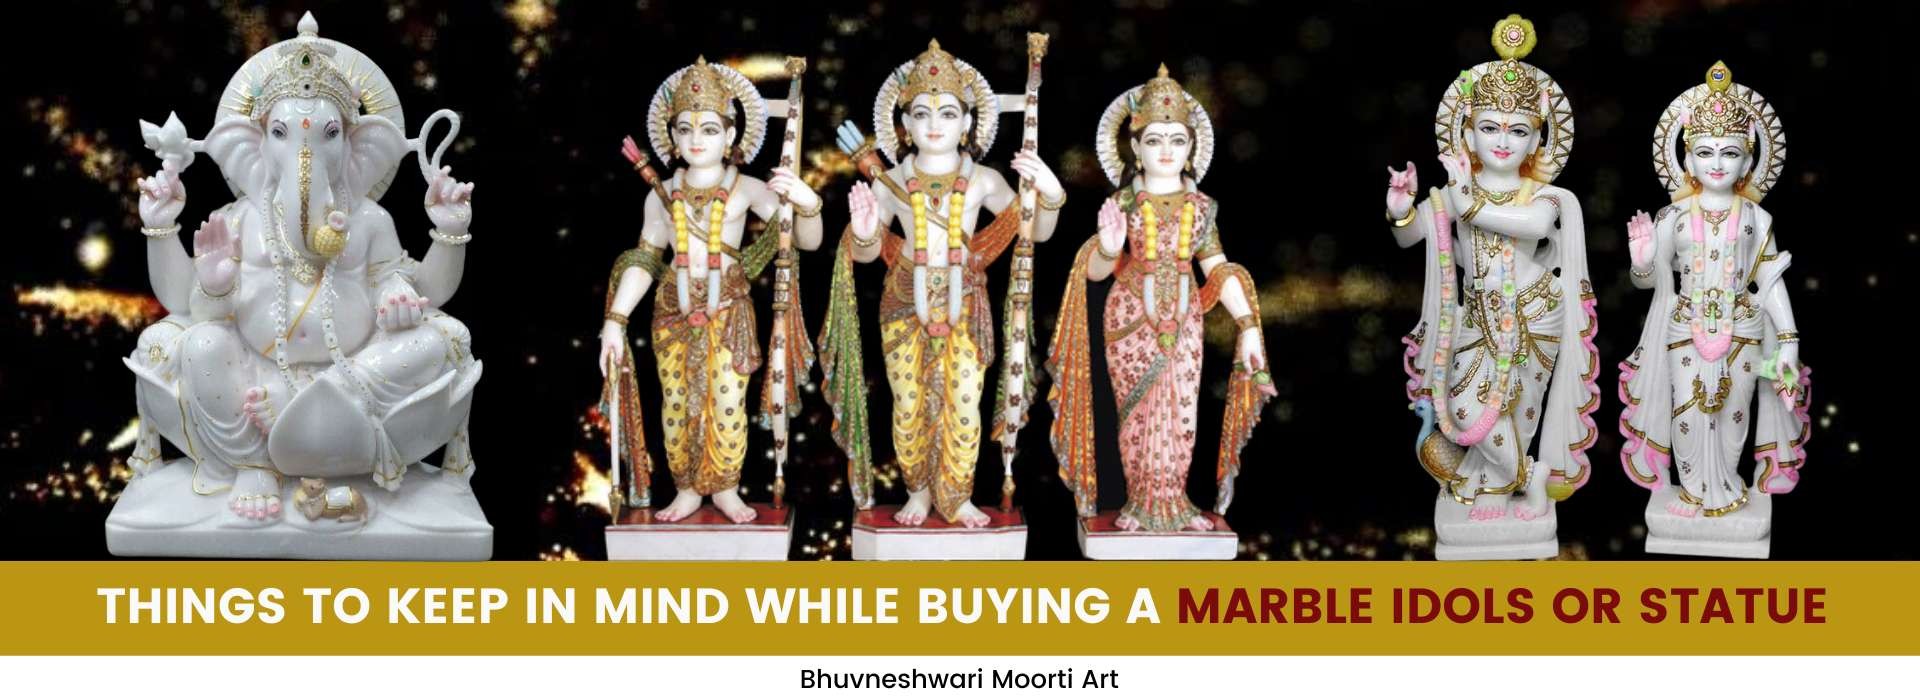 Things To Keep In Mind While Buying A Marble Idol Or Statue